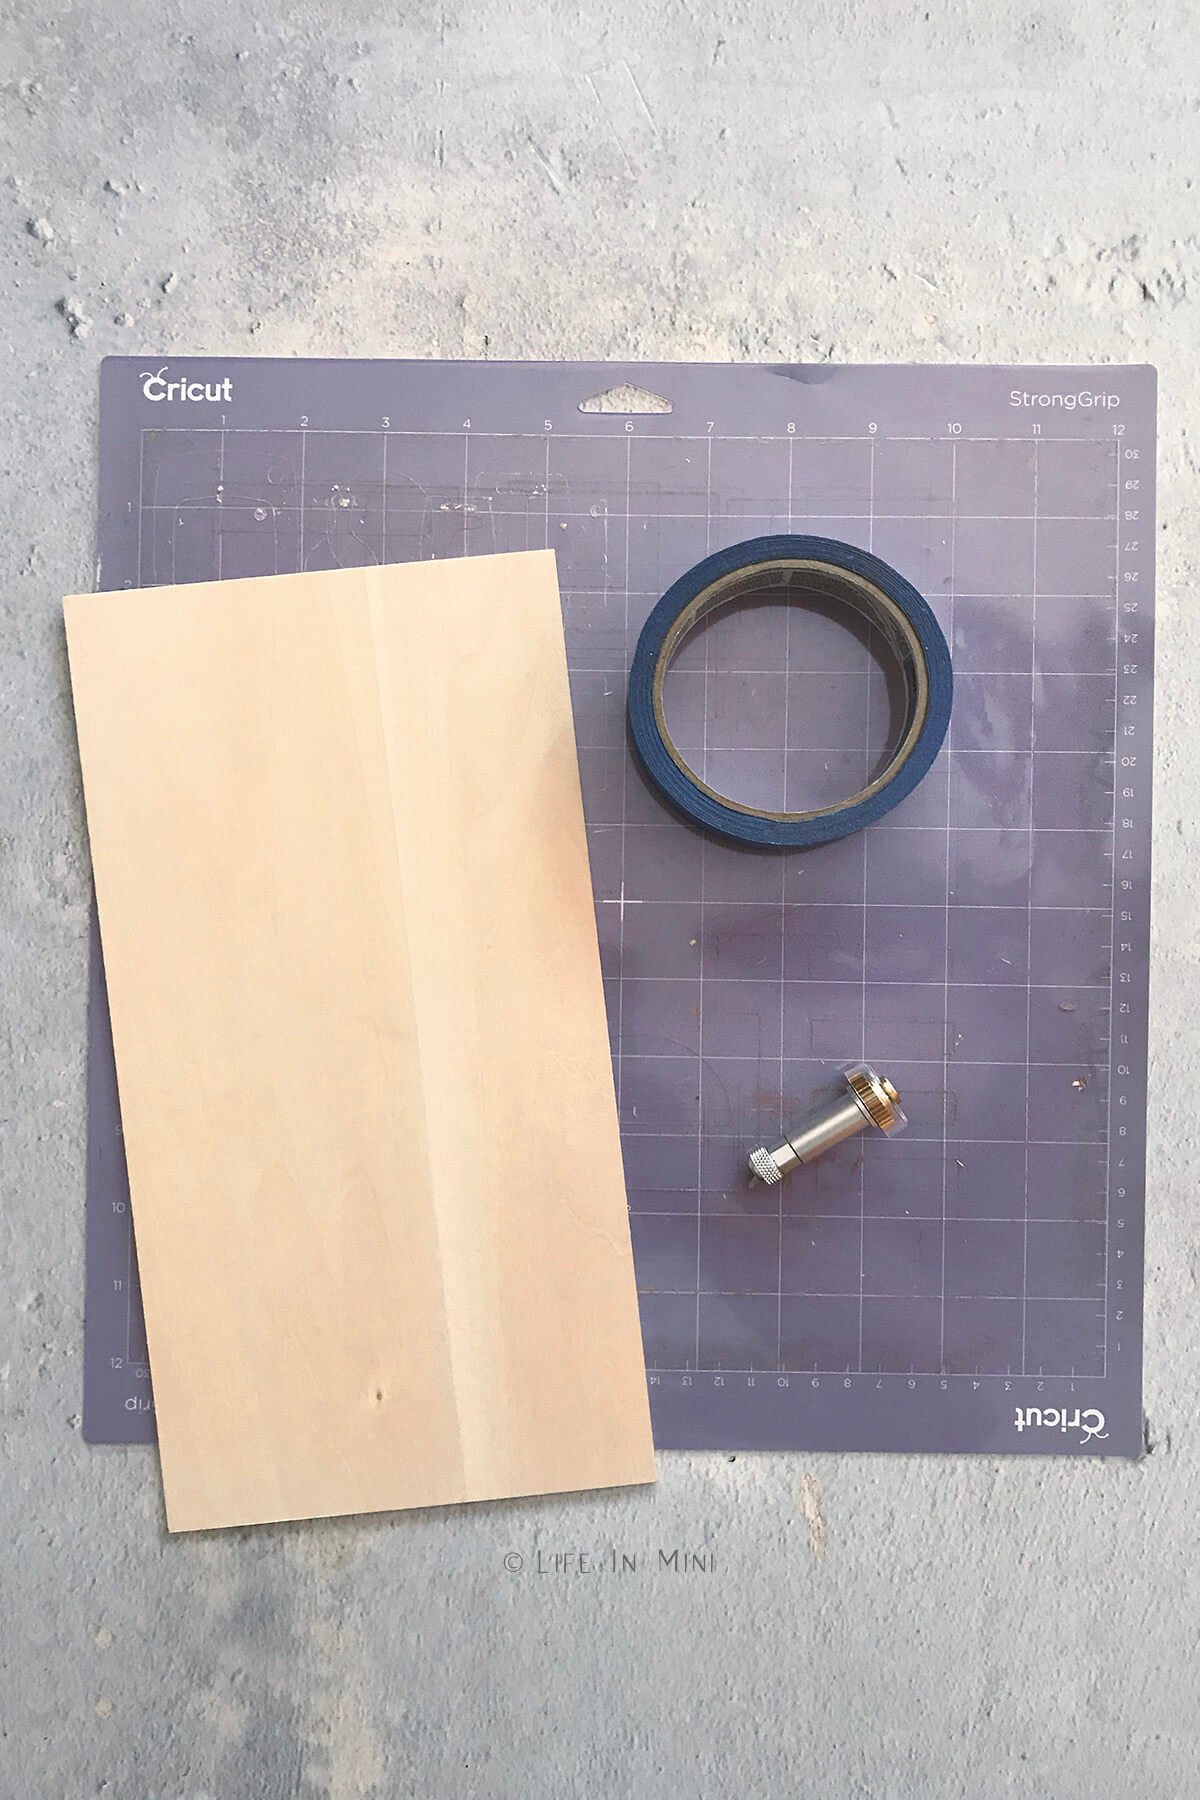 Items needed to make miniature cutting boards